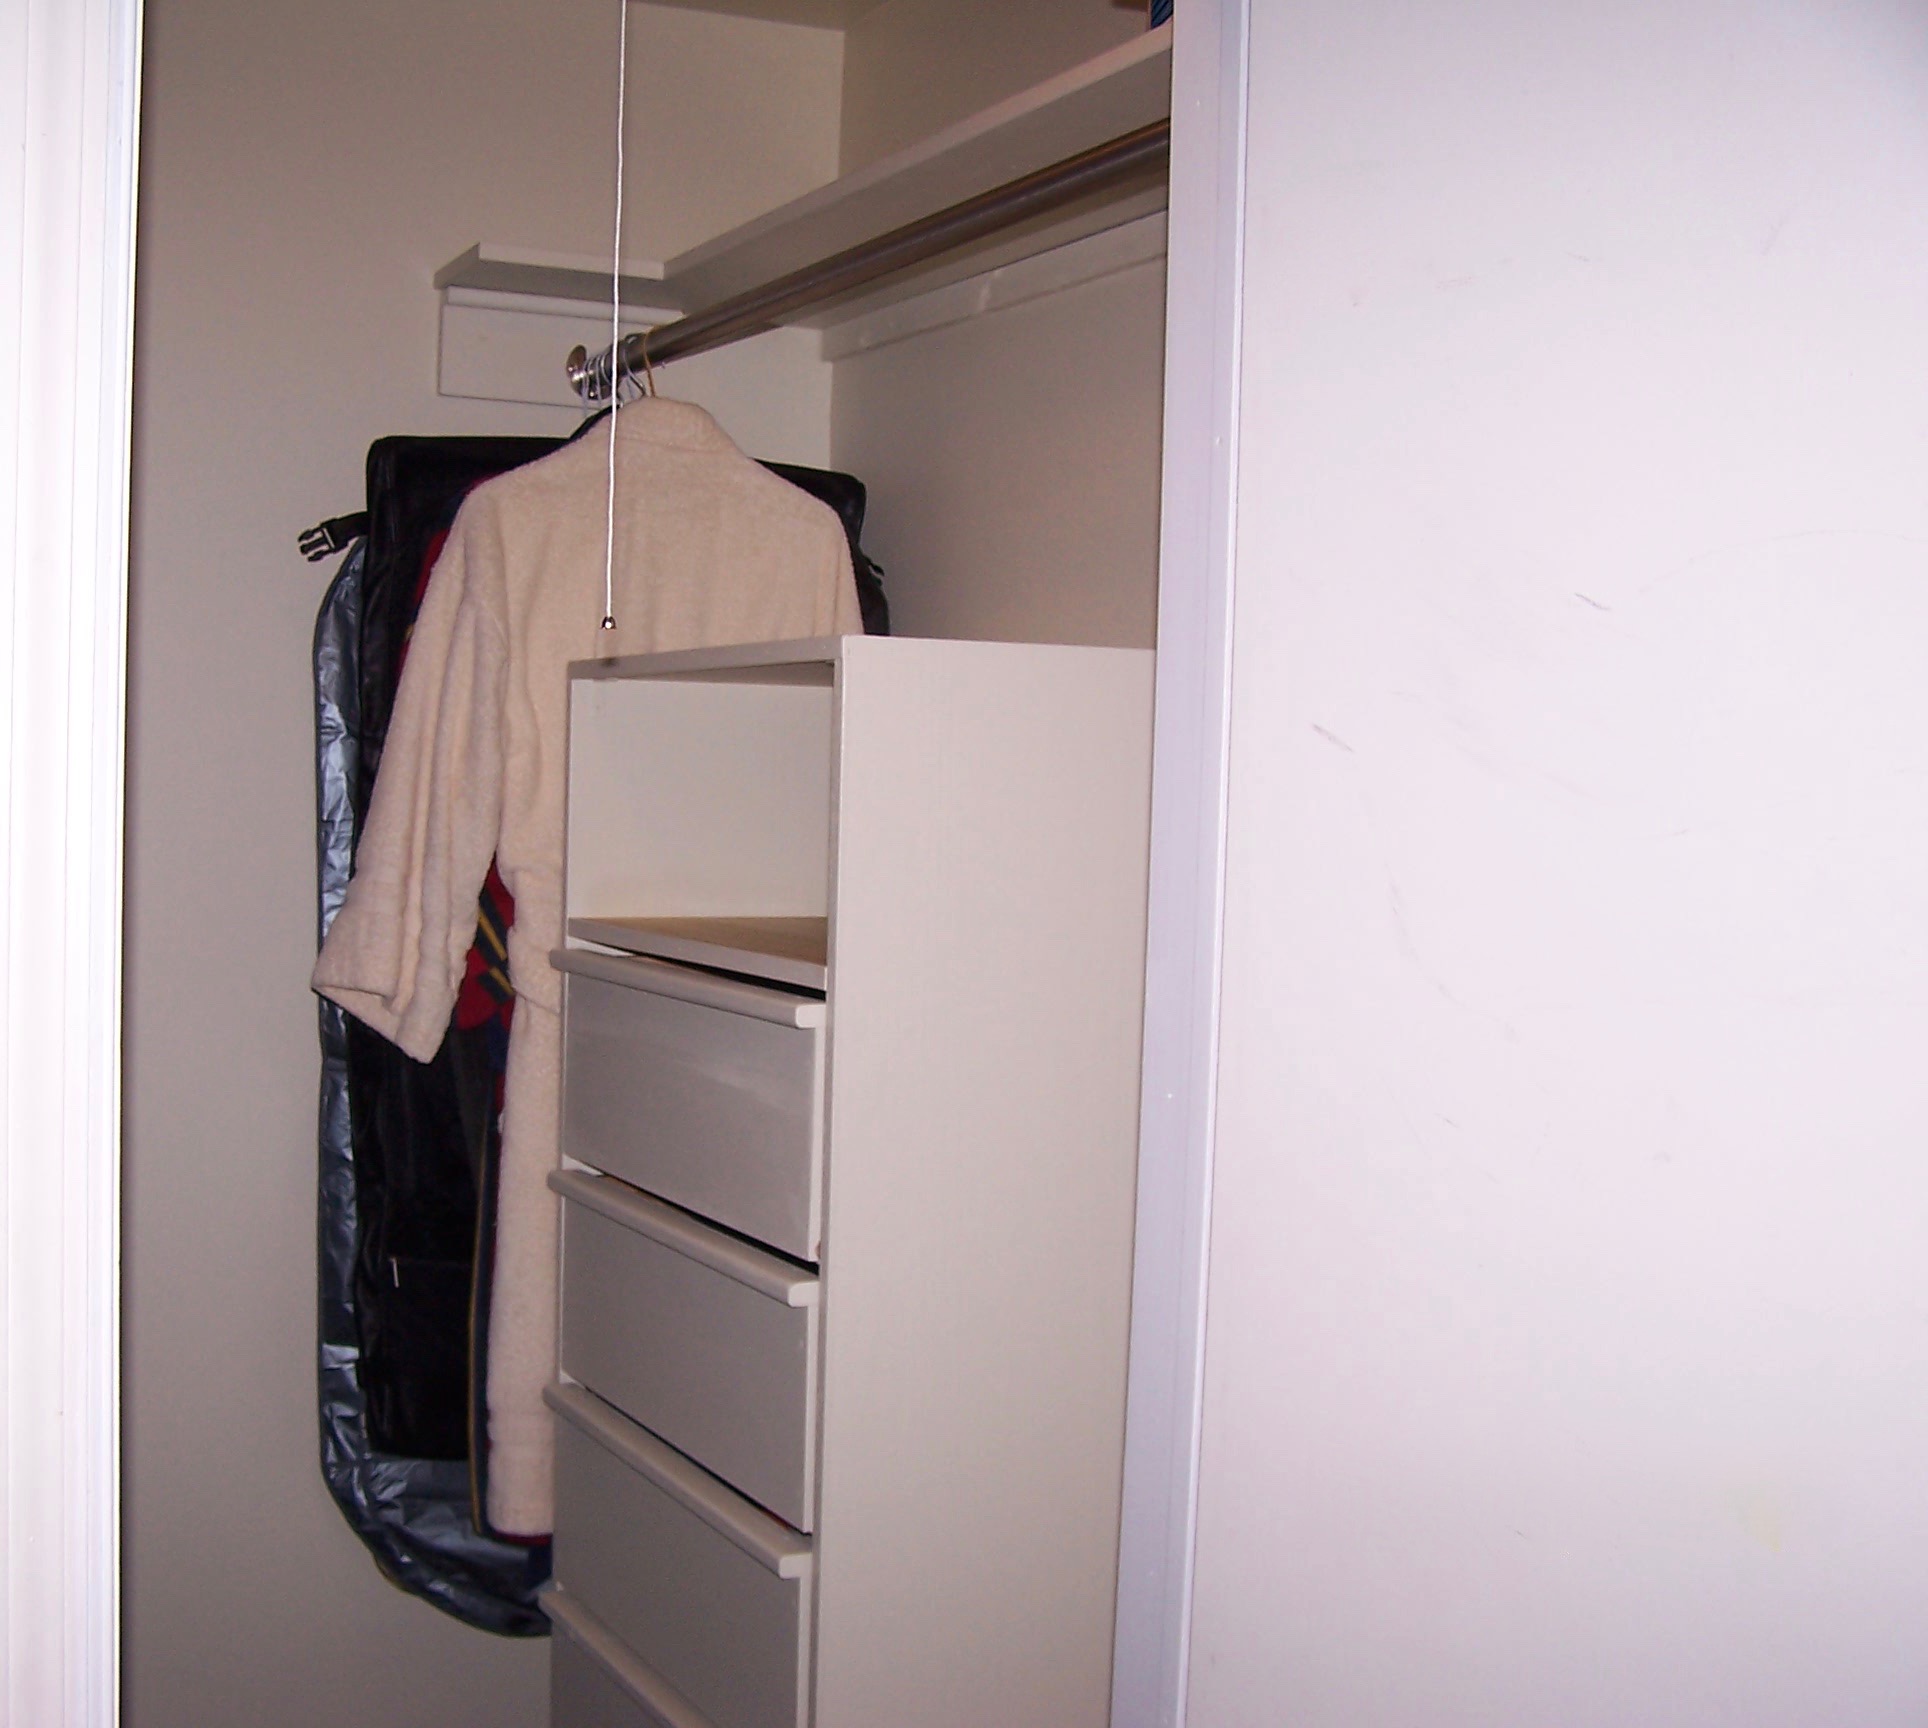 Clothes on the closet pole beside the hanging wall chest.